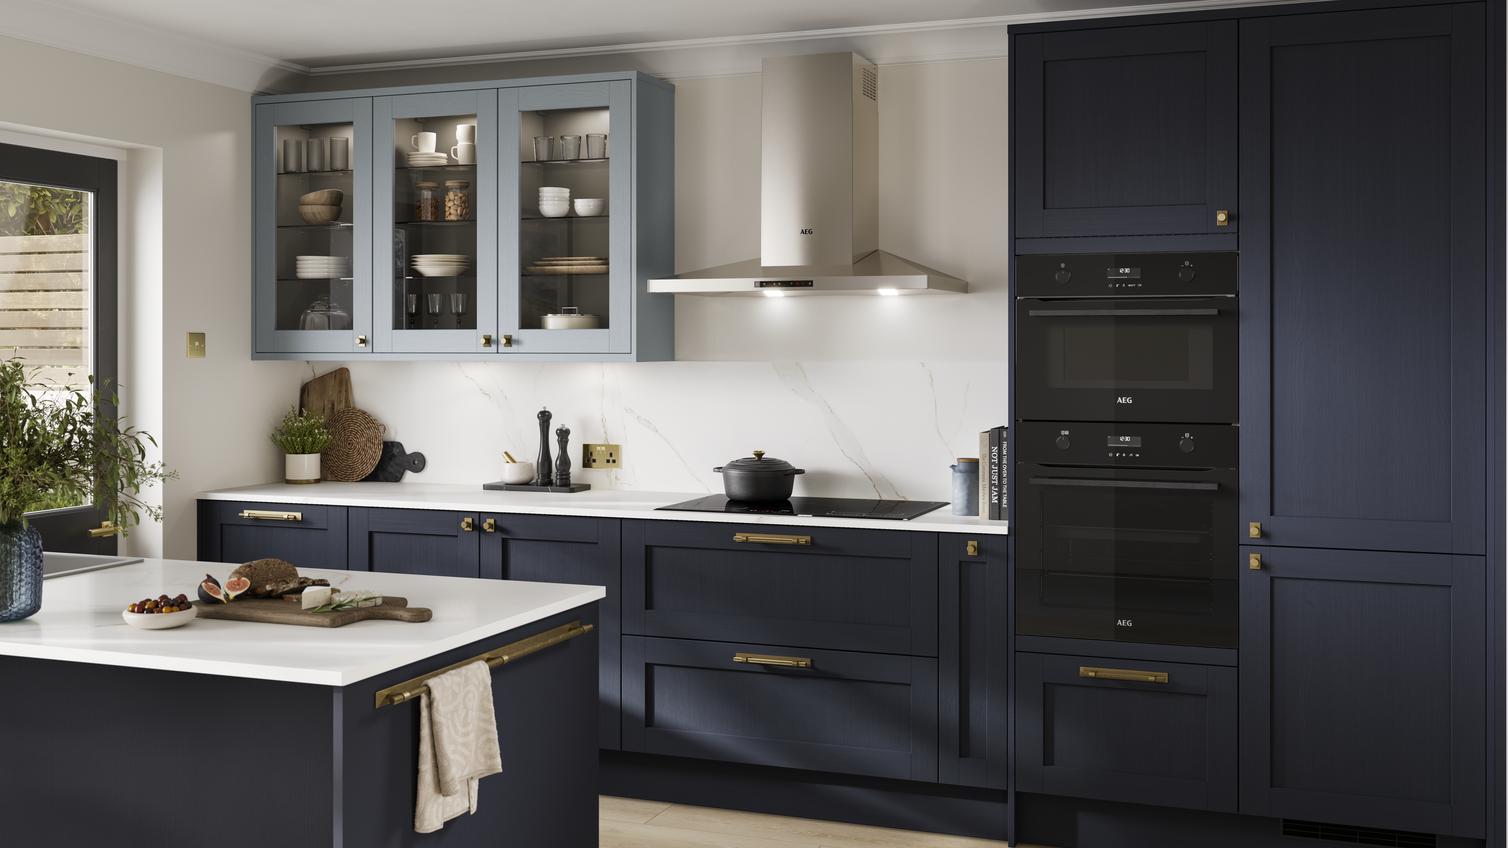 A dark, shaker-style Navy kitchen from the Halesworth range. Features integrated oven and hob, and a matching kitchen island